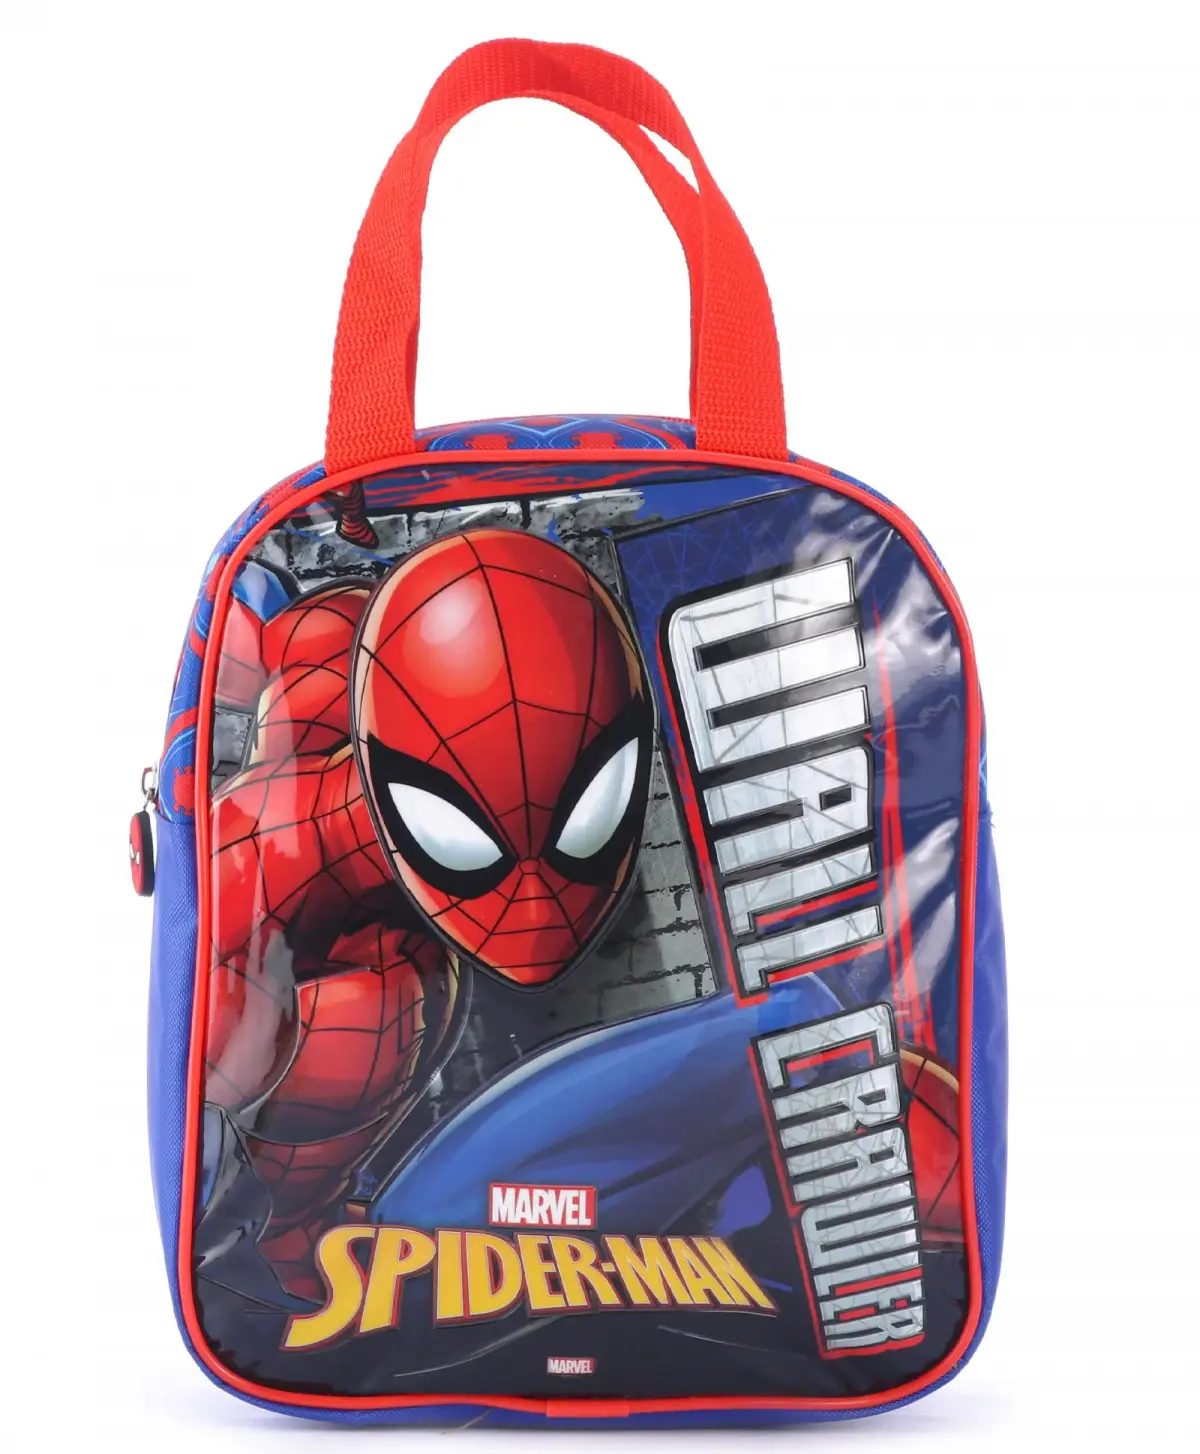 Striders Spiderman Lunch Bag ??? Insulated Marvel Hero Lunch Tote for Kids, 3Y+, Multicolour